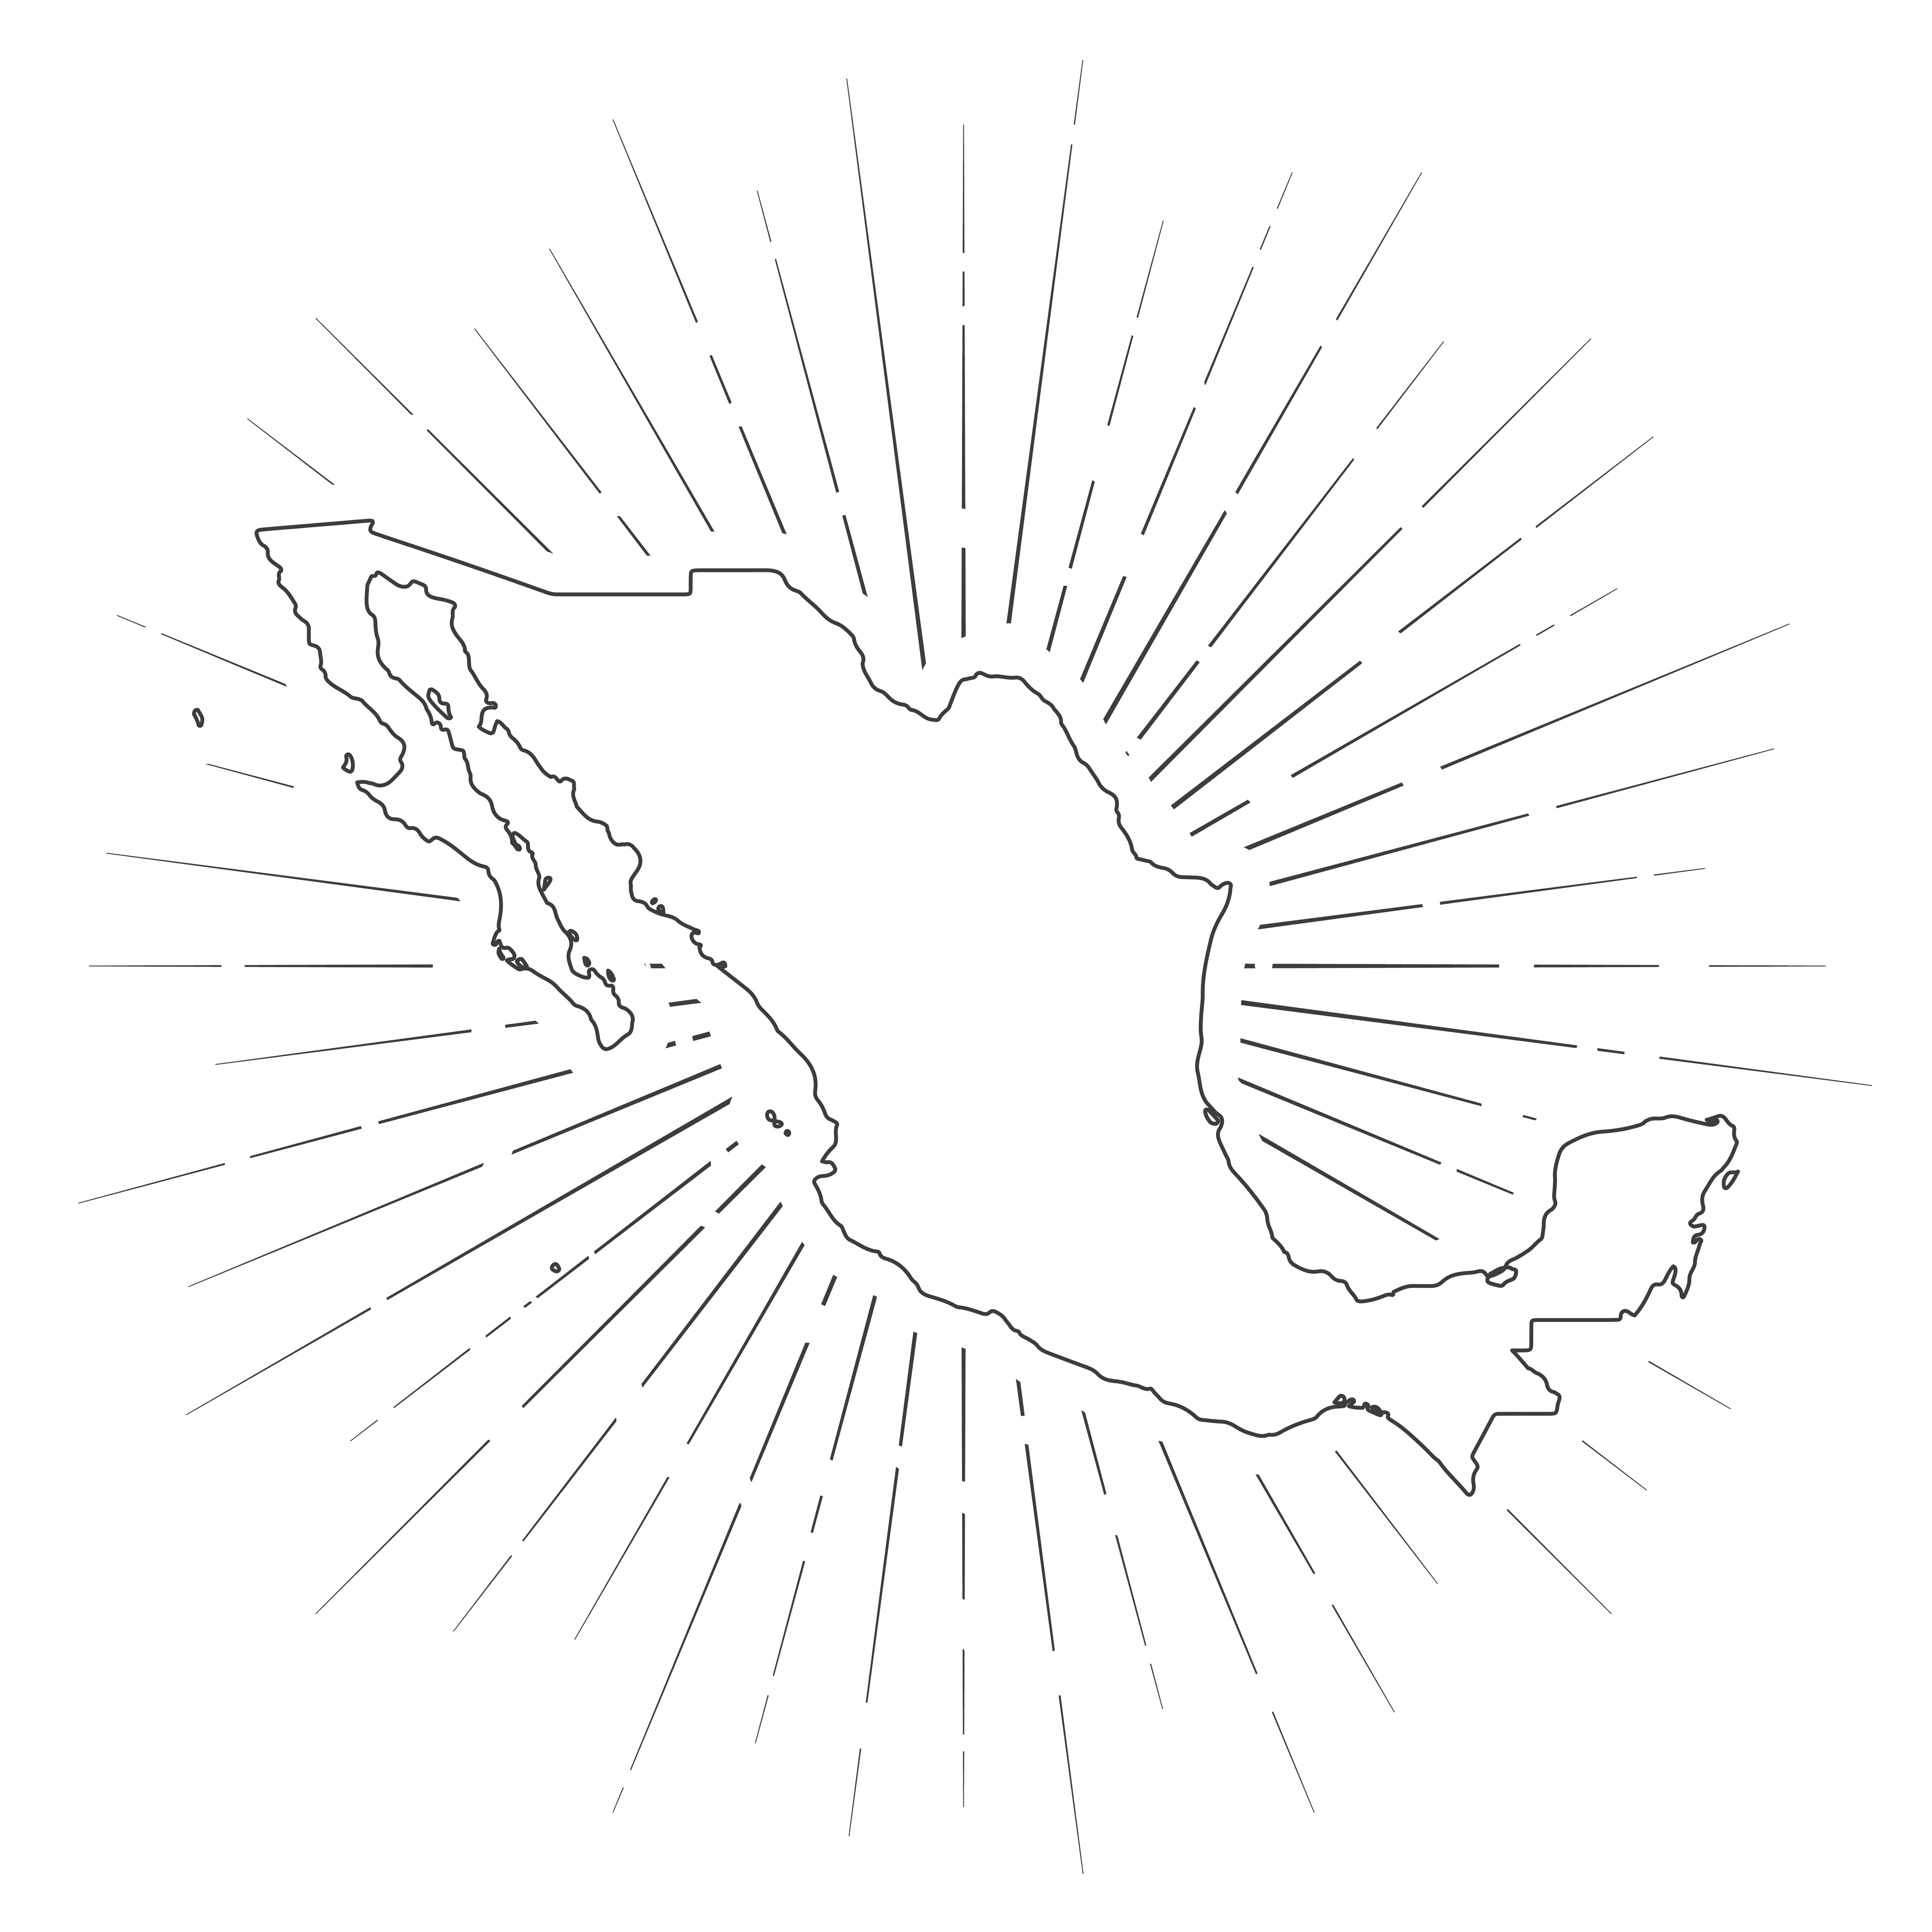 A map of Mexico with sunbursts radiating around it.